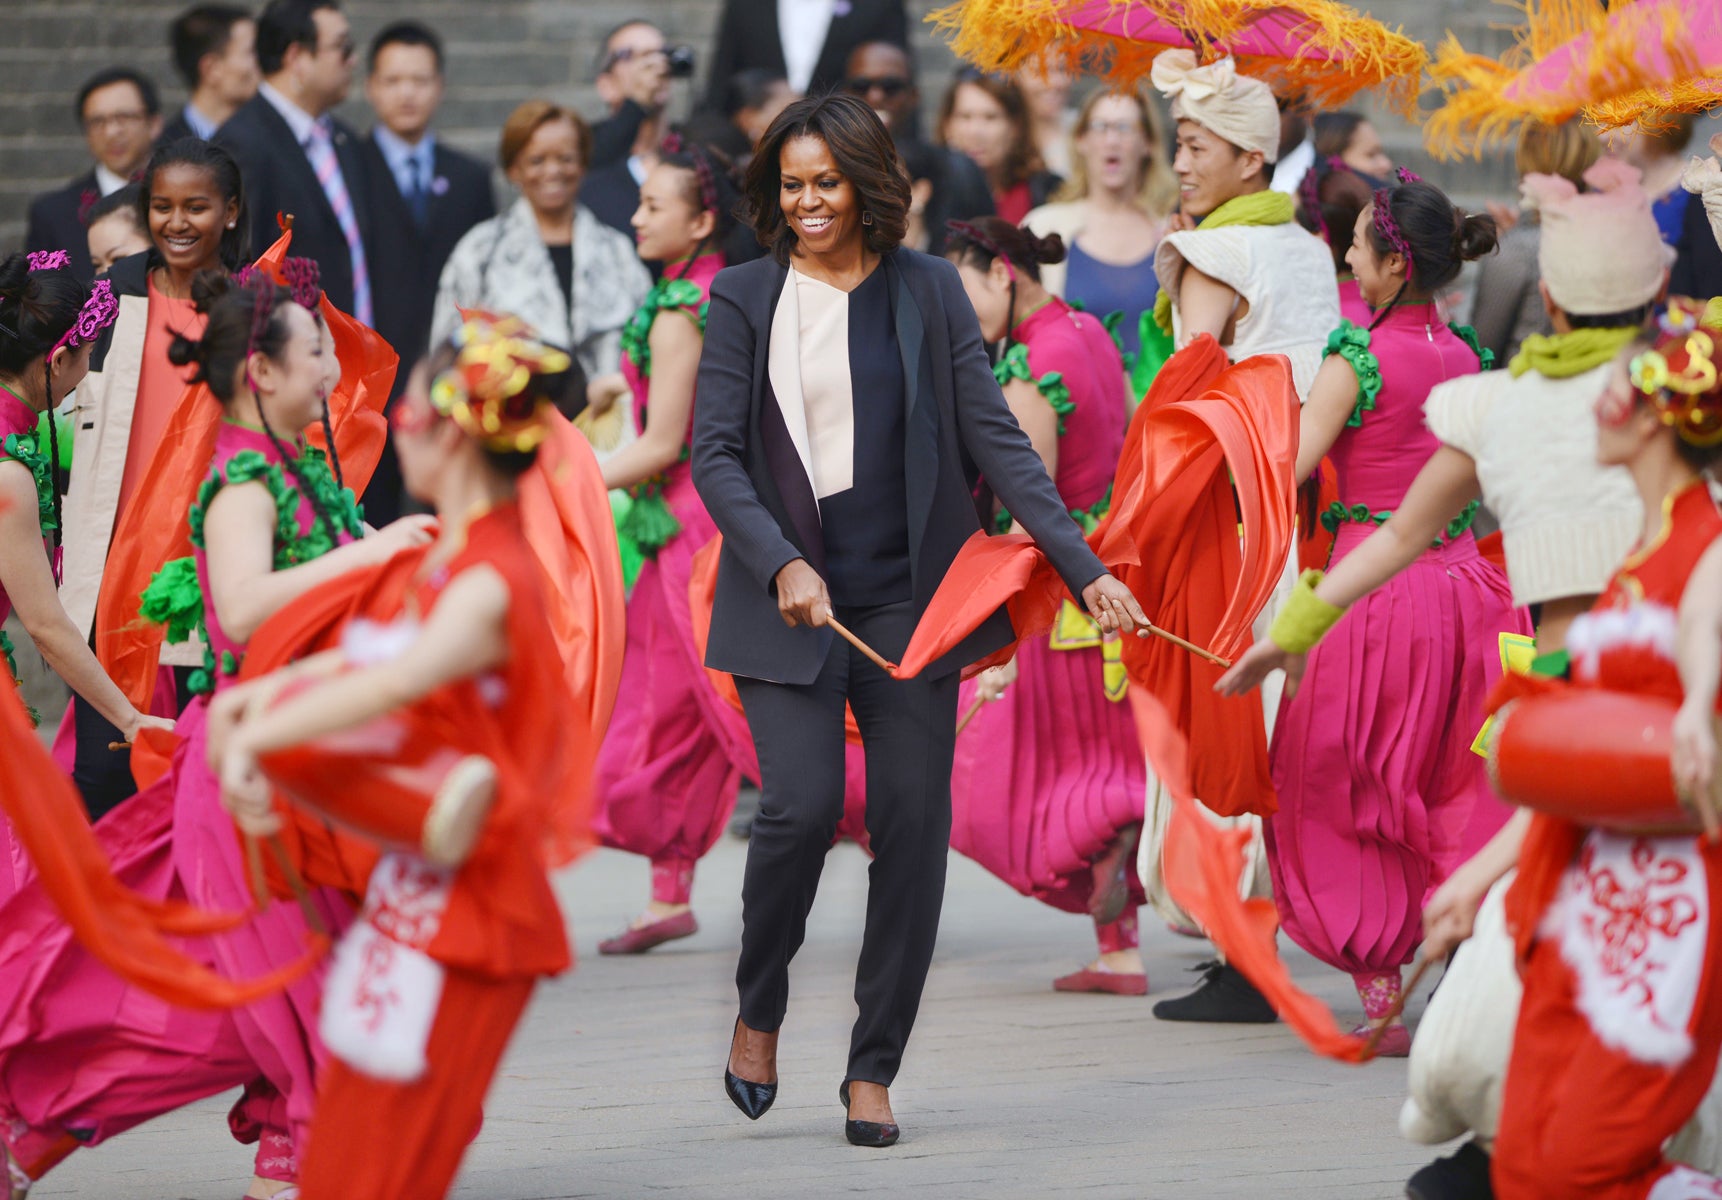 First Lady Travel Diary: Michelle Obama's International Stops
